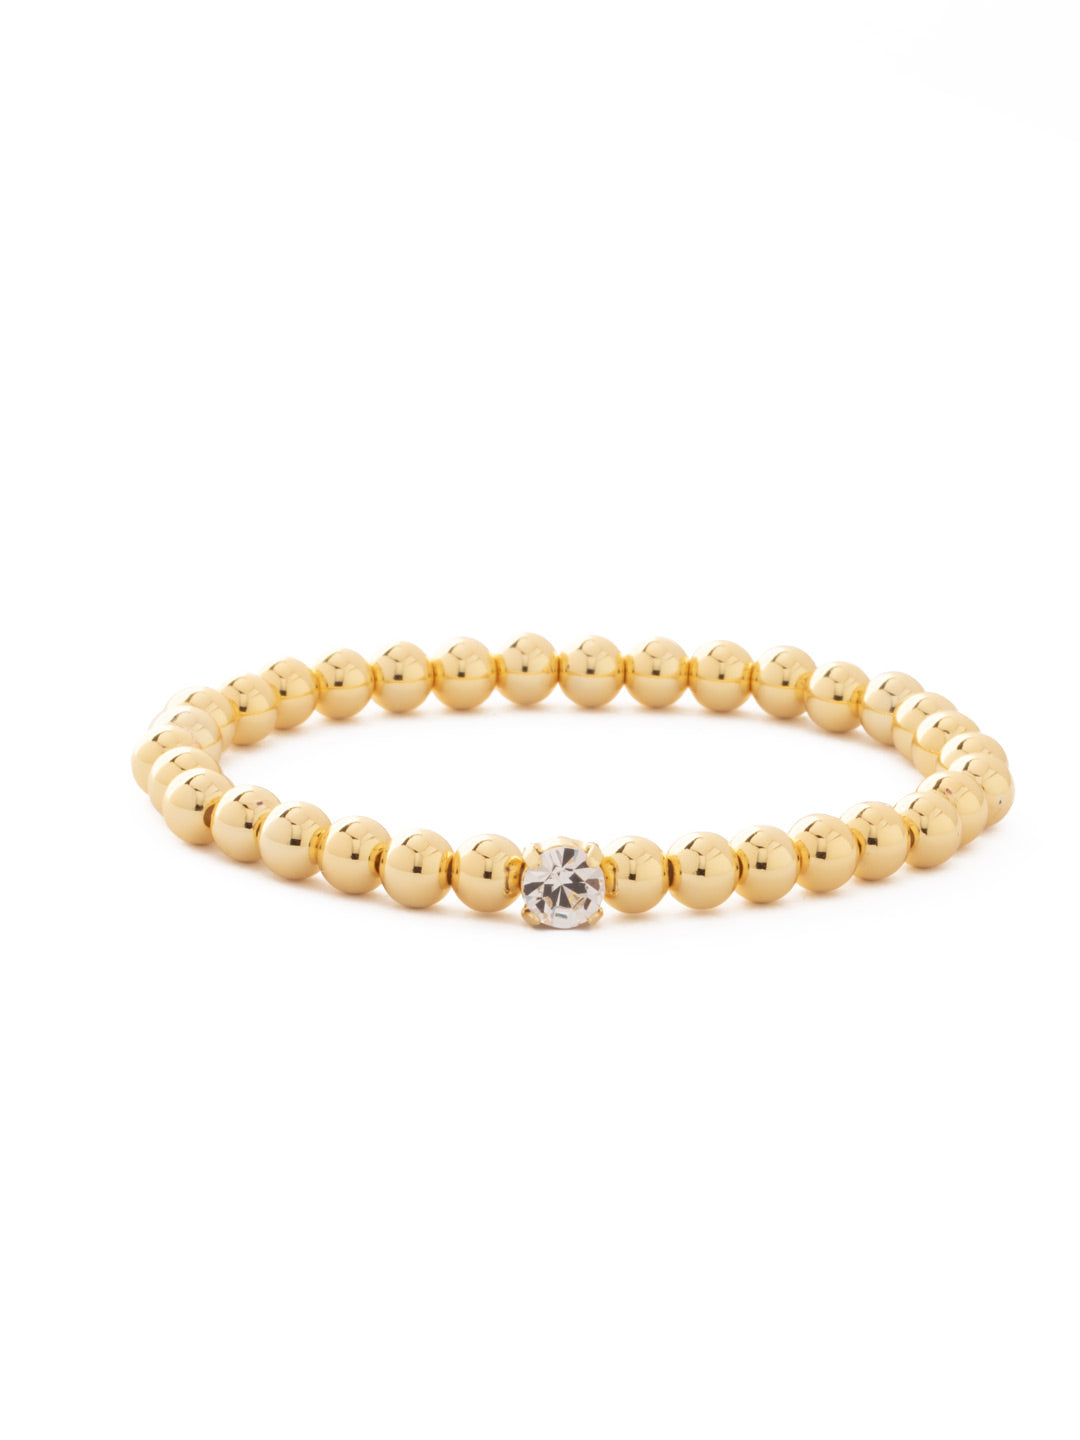 Mini Single Crystal Stretch Bracelet - BFN33BGCRY - <p>The Mini Single Crystal Stretch Bracelet features repeating metal beads and a single round cut crystal on a multi-layered stretchy jewelry filament, creating a durable and trendy piece. From Sorrelli's Crystal collection in our Bright Gold-tone finish.</p>